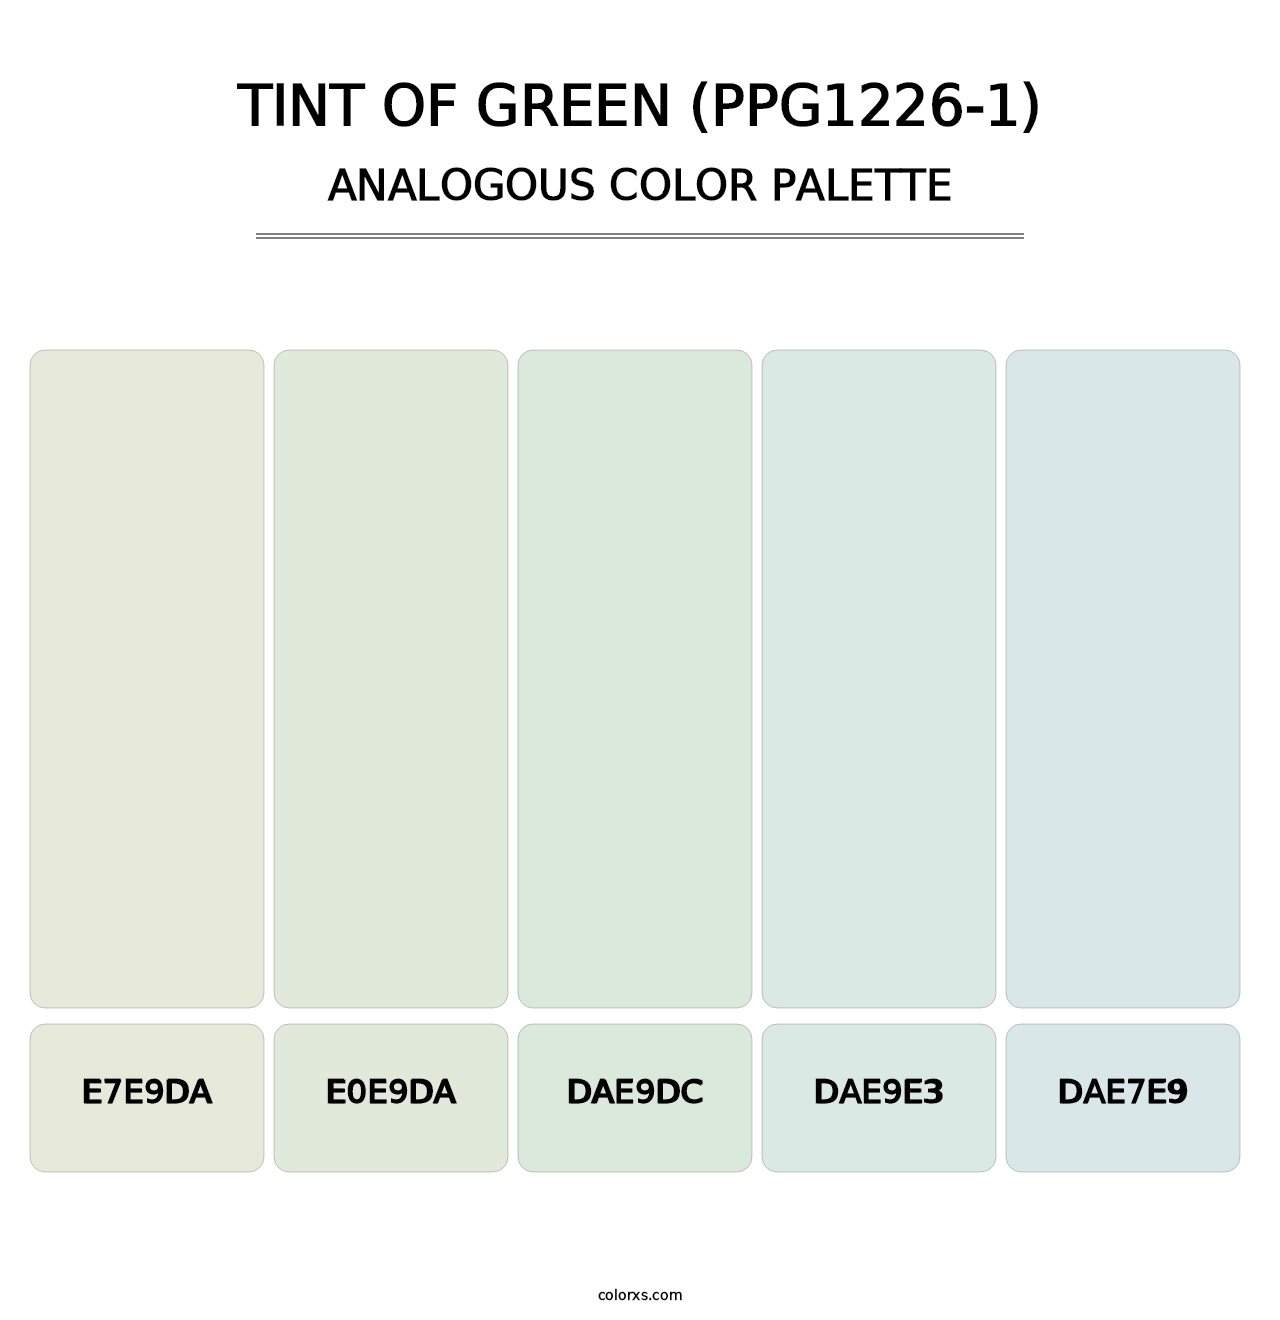 Tint Of Green (PPG1226-1) - Analogous Color Palette